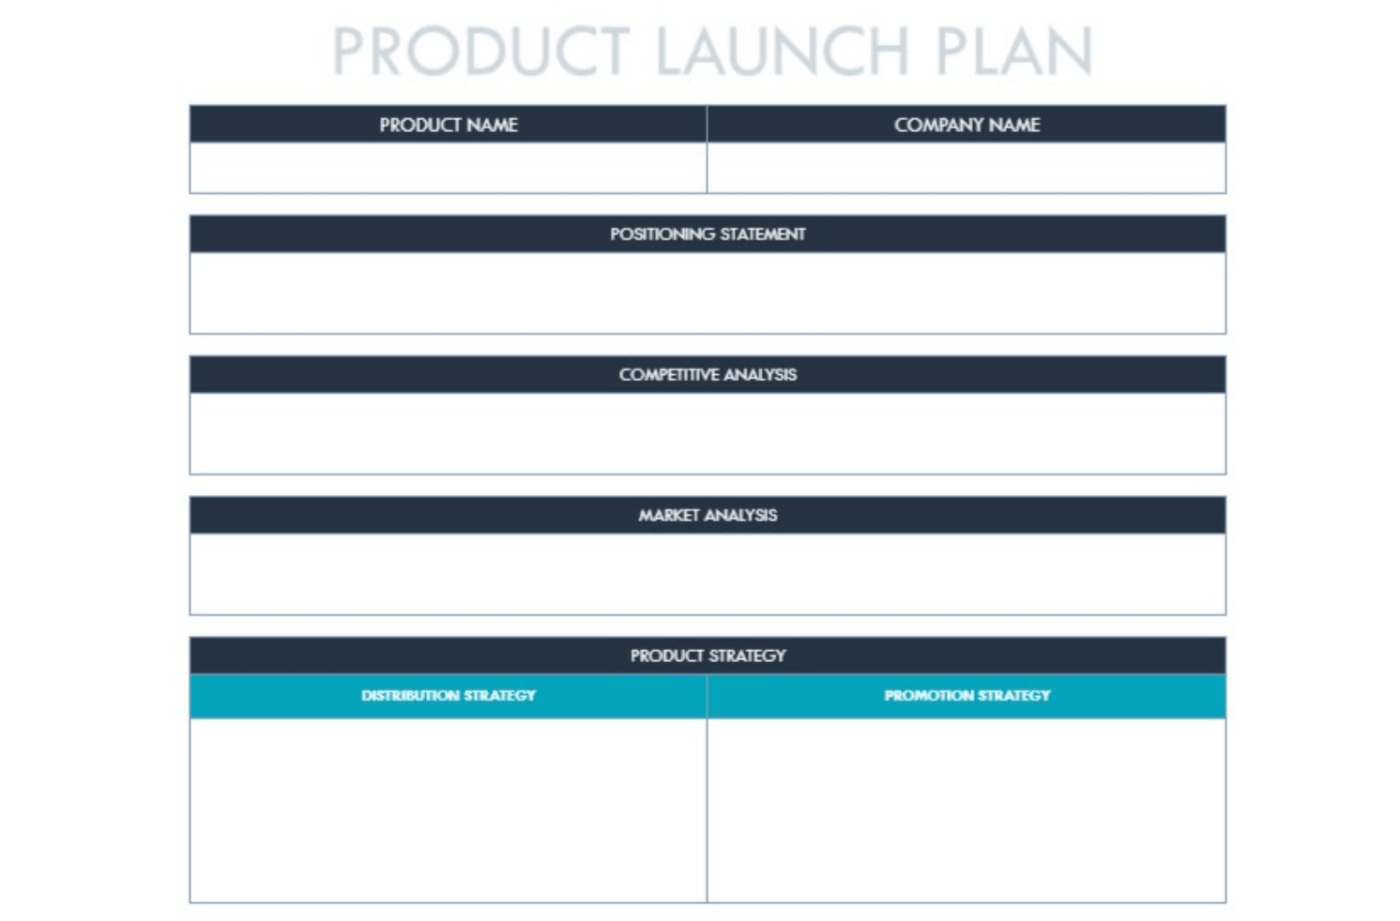 Google Sheets Product Launch Plan Template